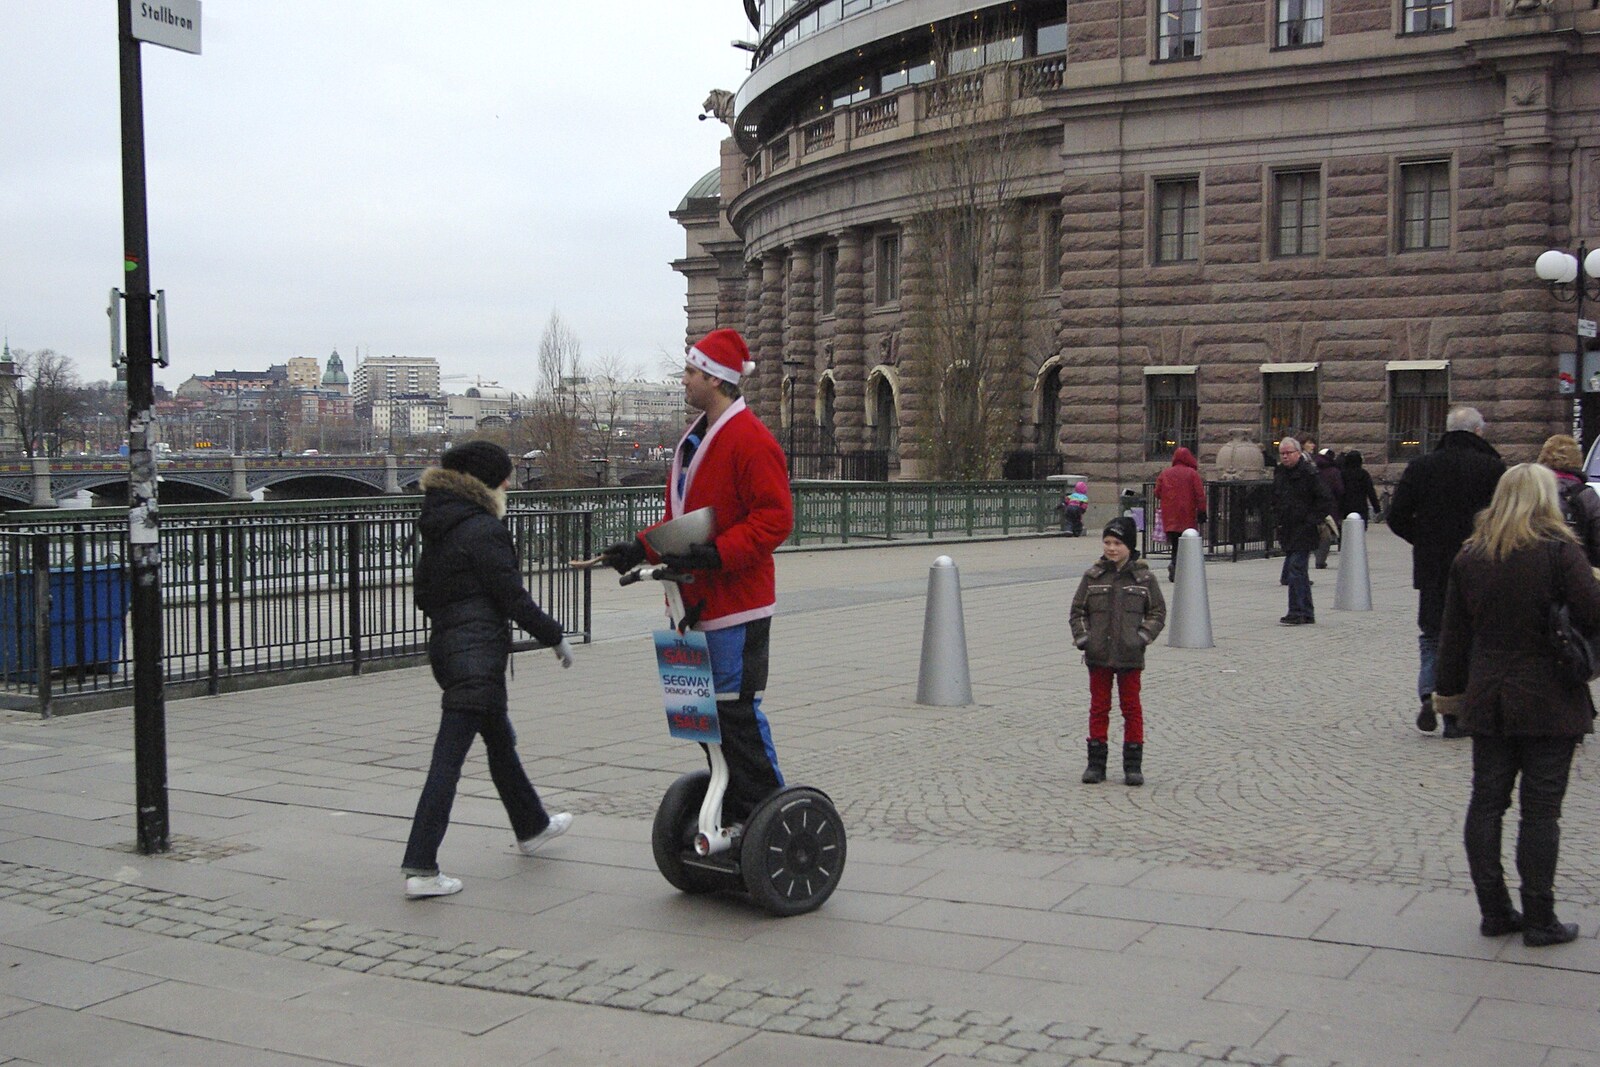 A guy on a Segway roams around handing out roasted nuts from Gamla Stan, Stockholm, Sweden - 15th December 2007